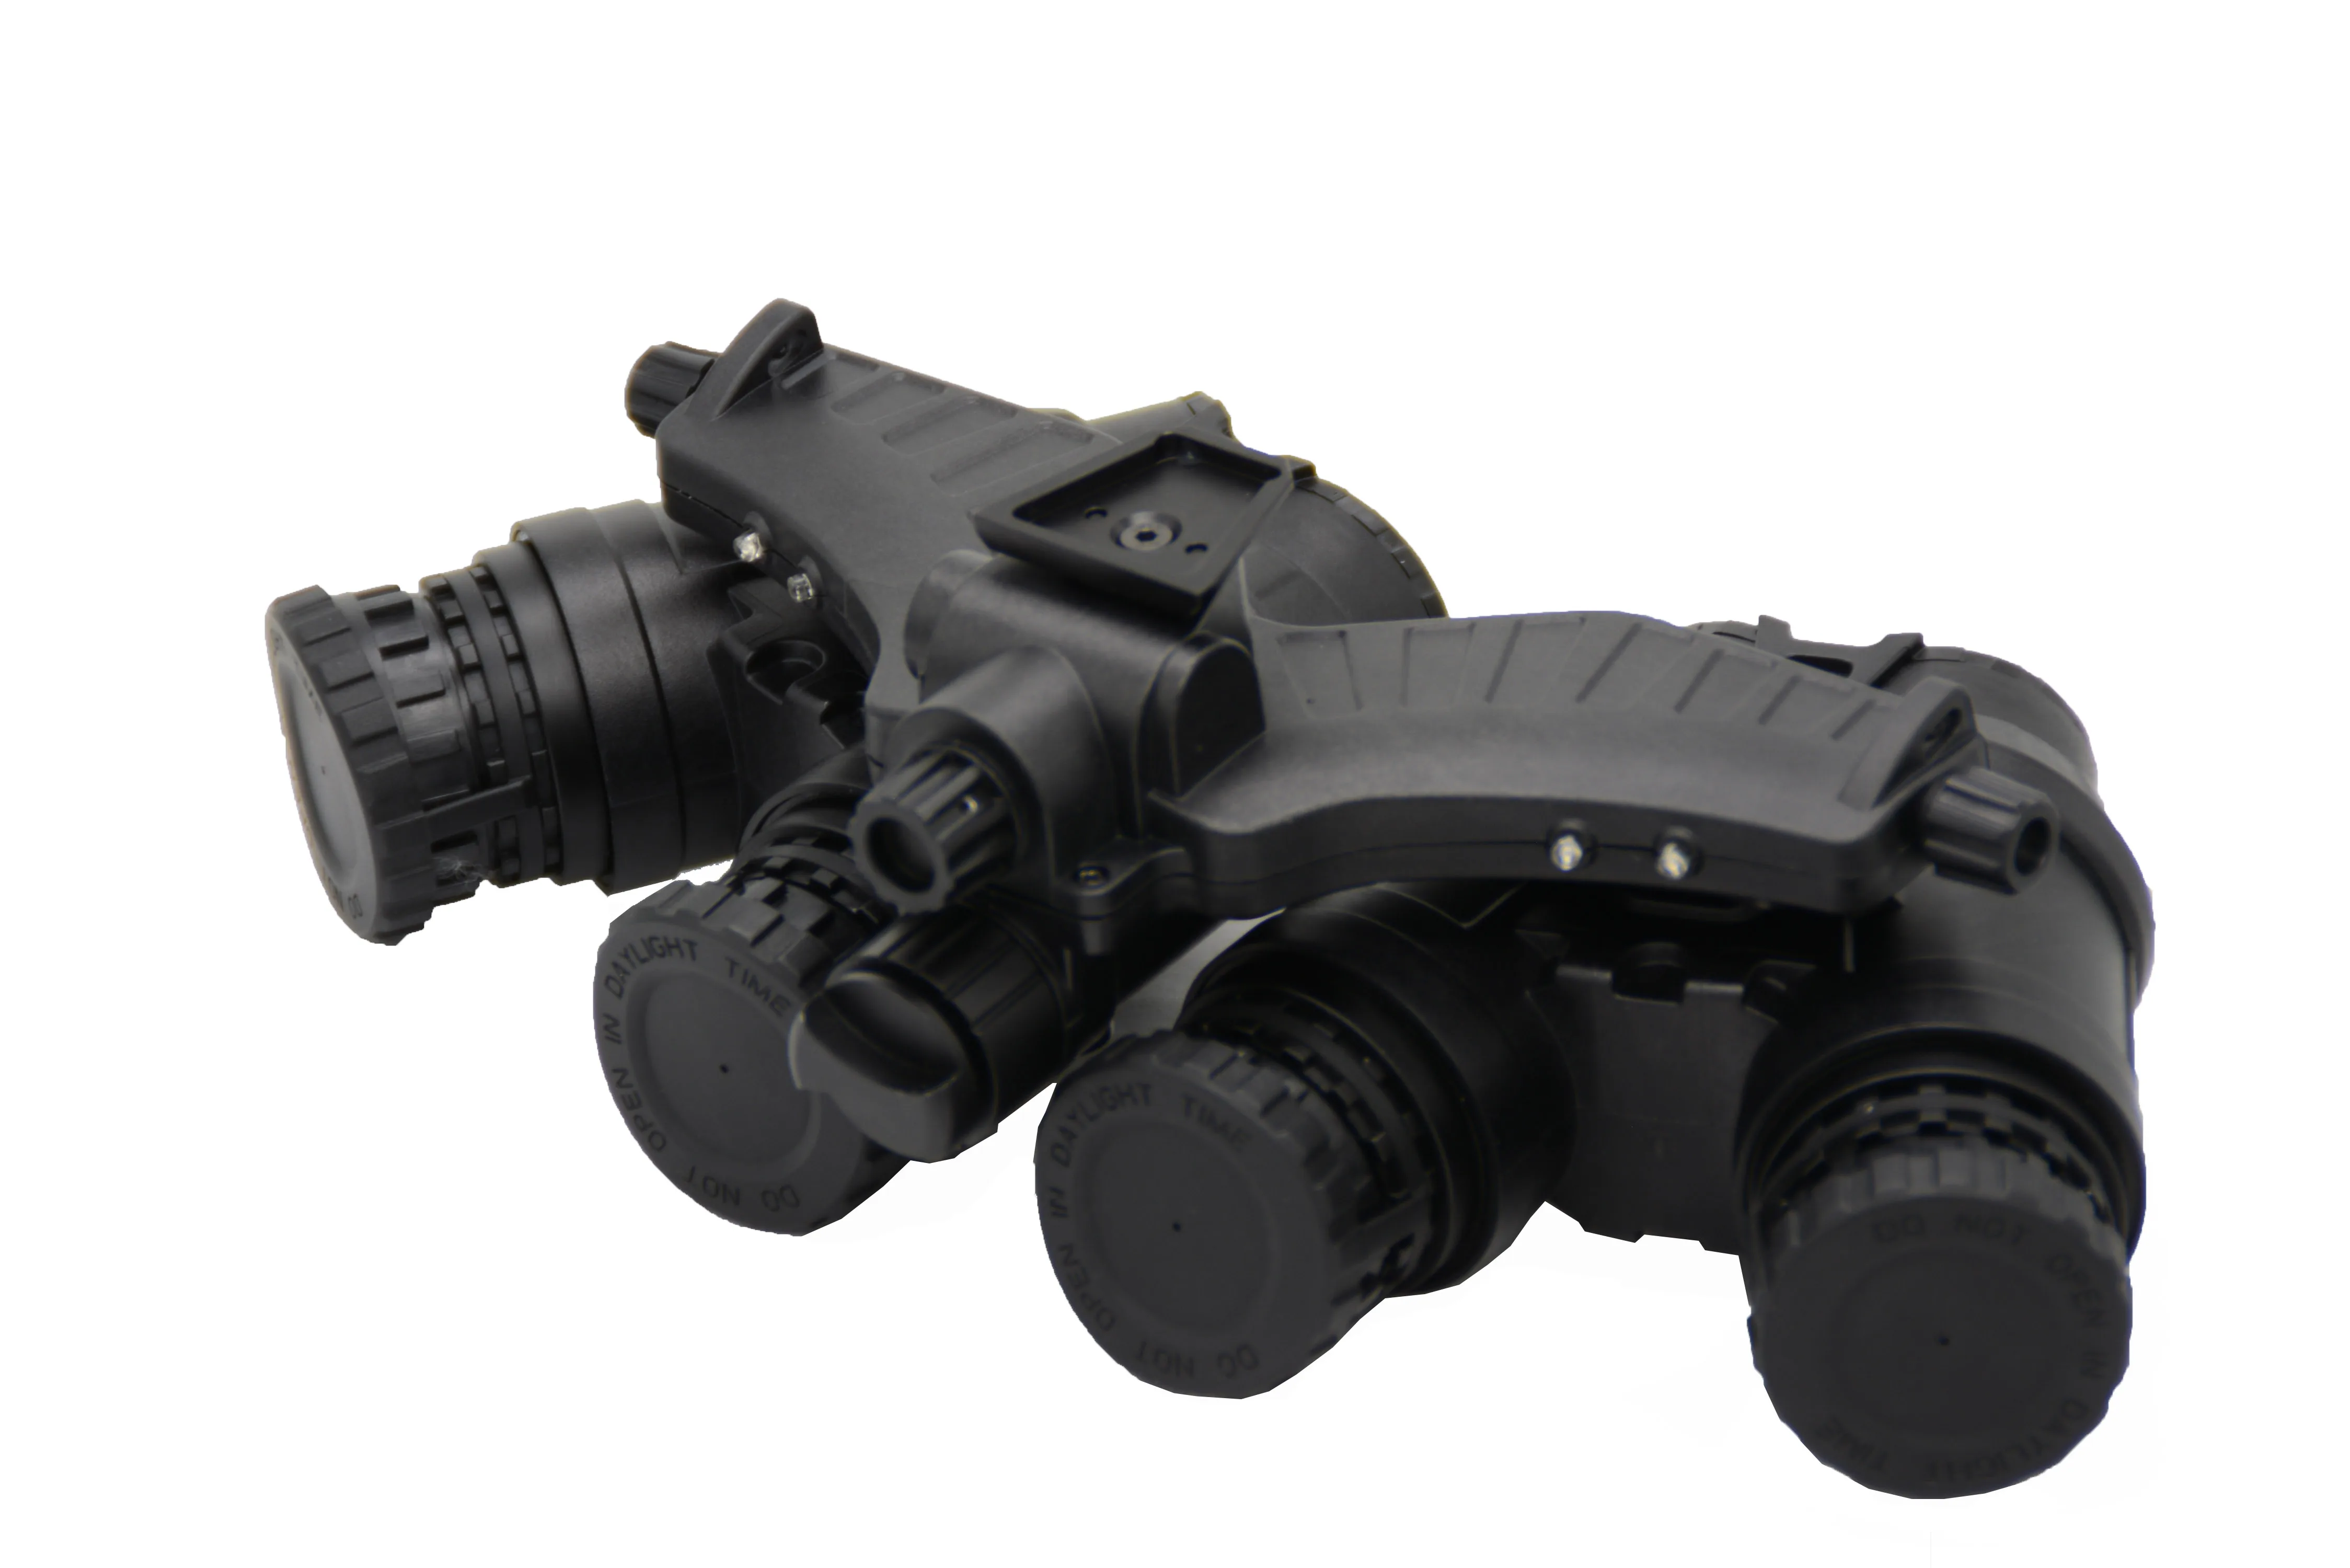 Single Large Field of View Four-Eye Night Vision Goggles Helmet Mounted Tactical Helmet and Night Vision